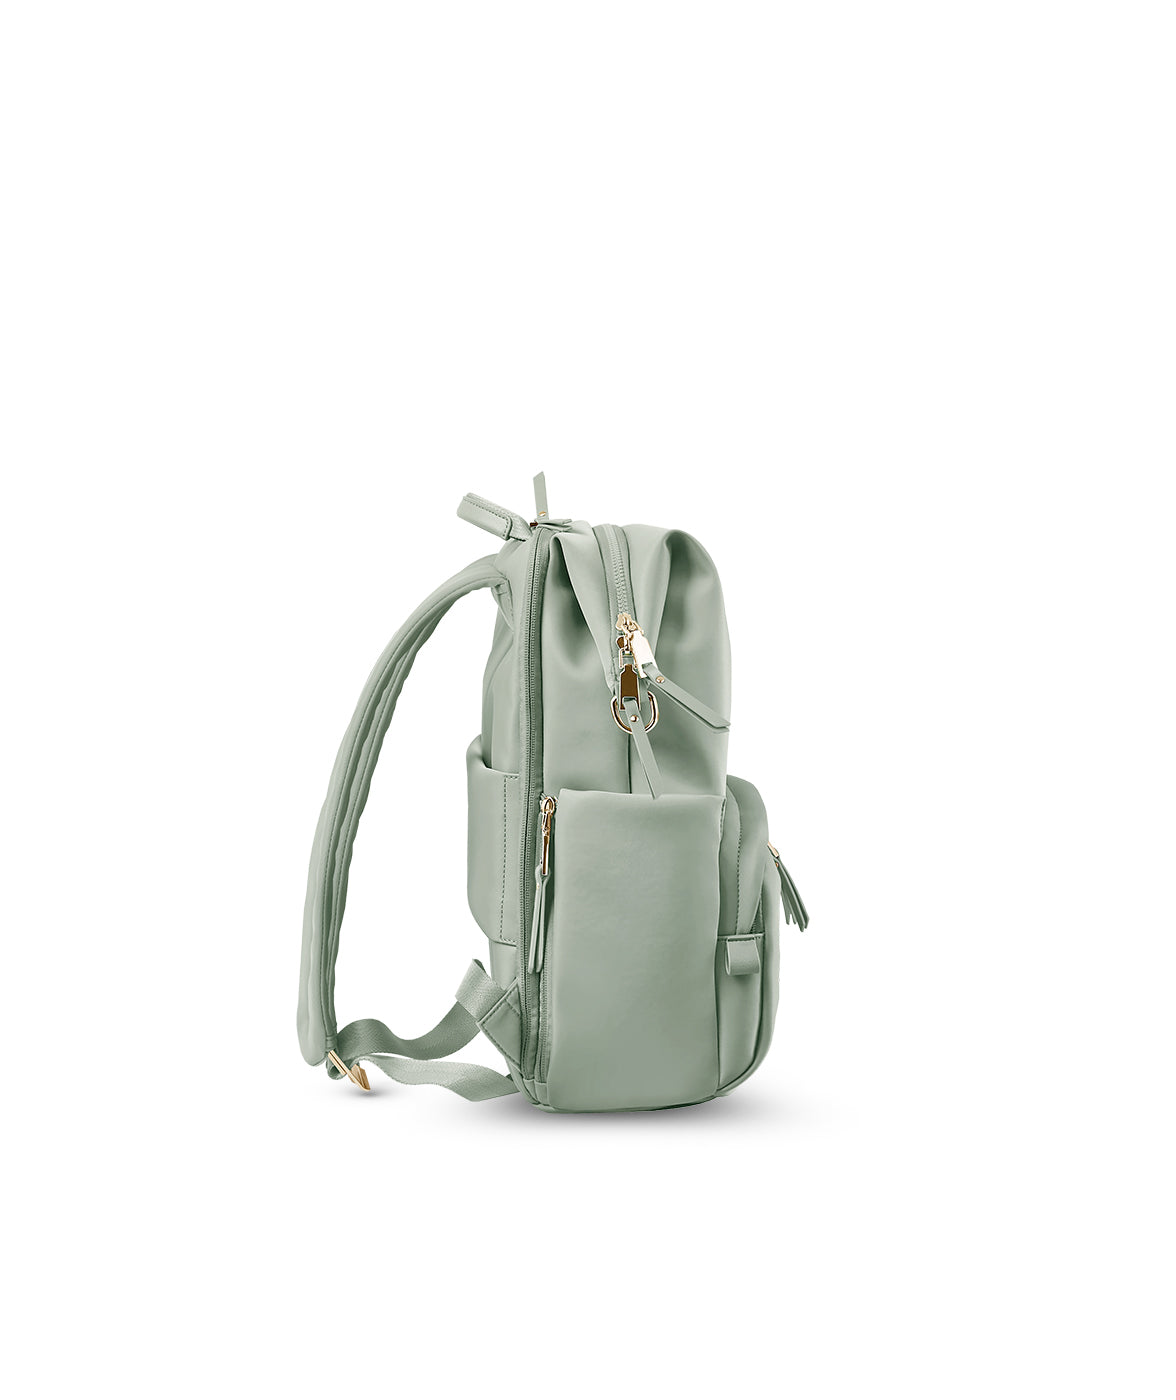 Purist Backpack